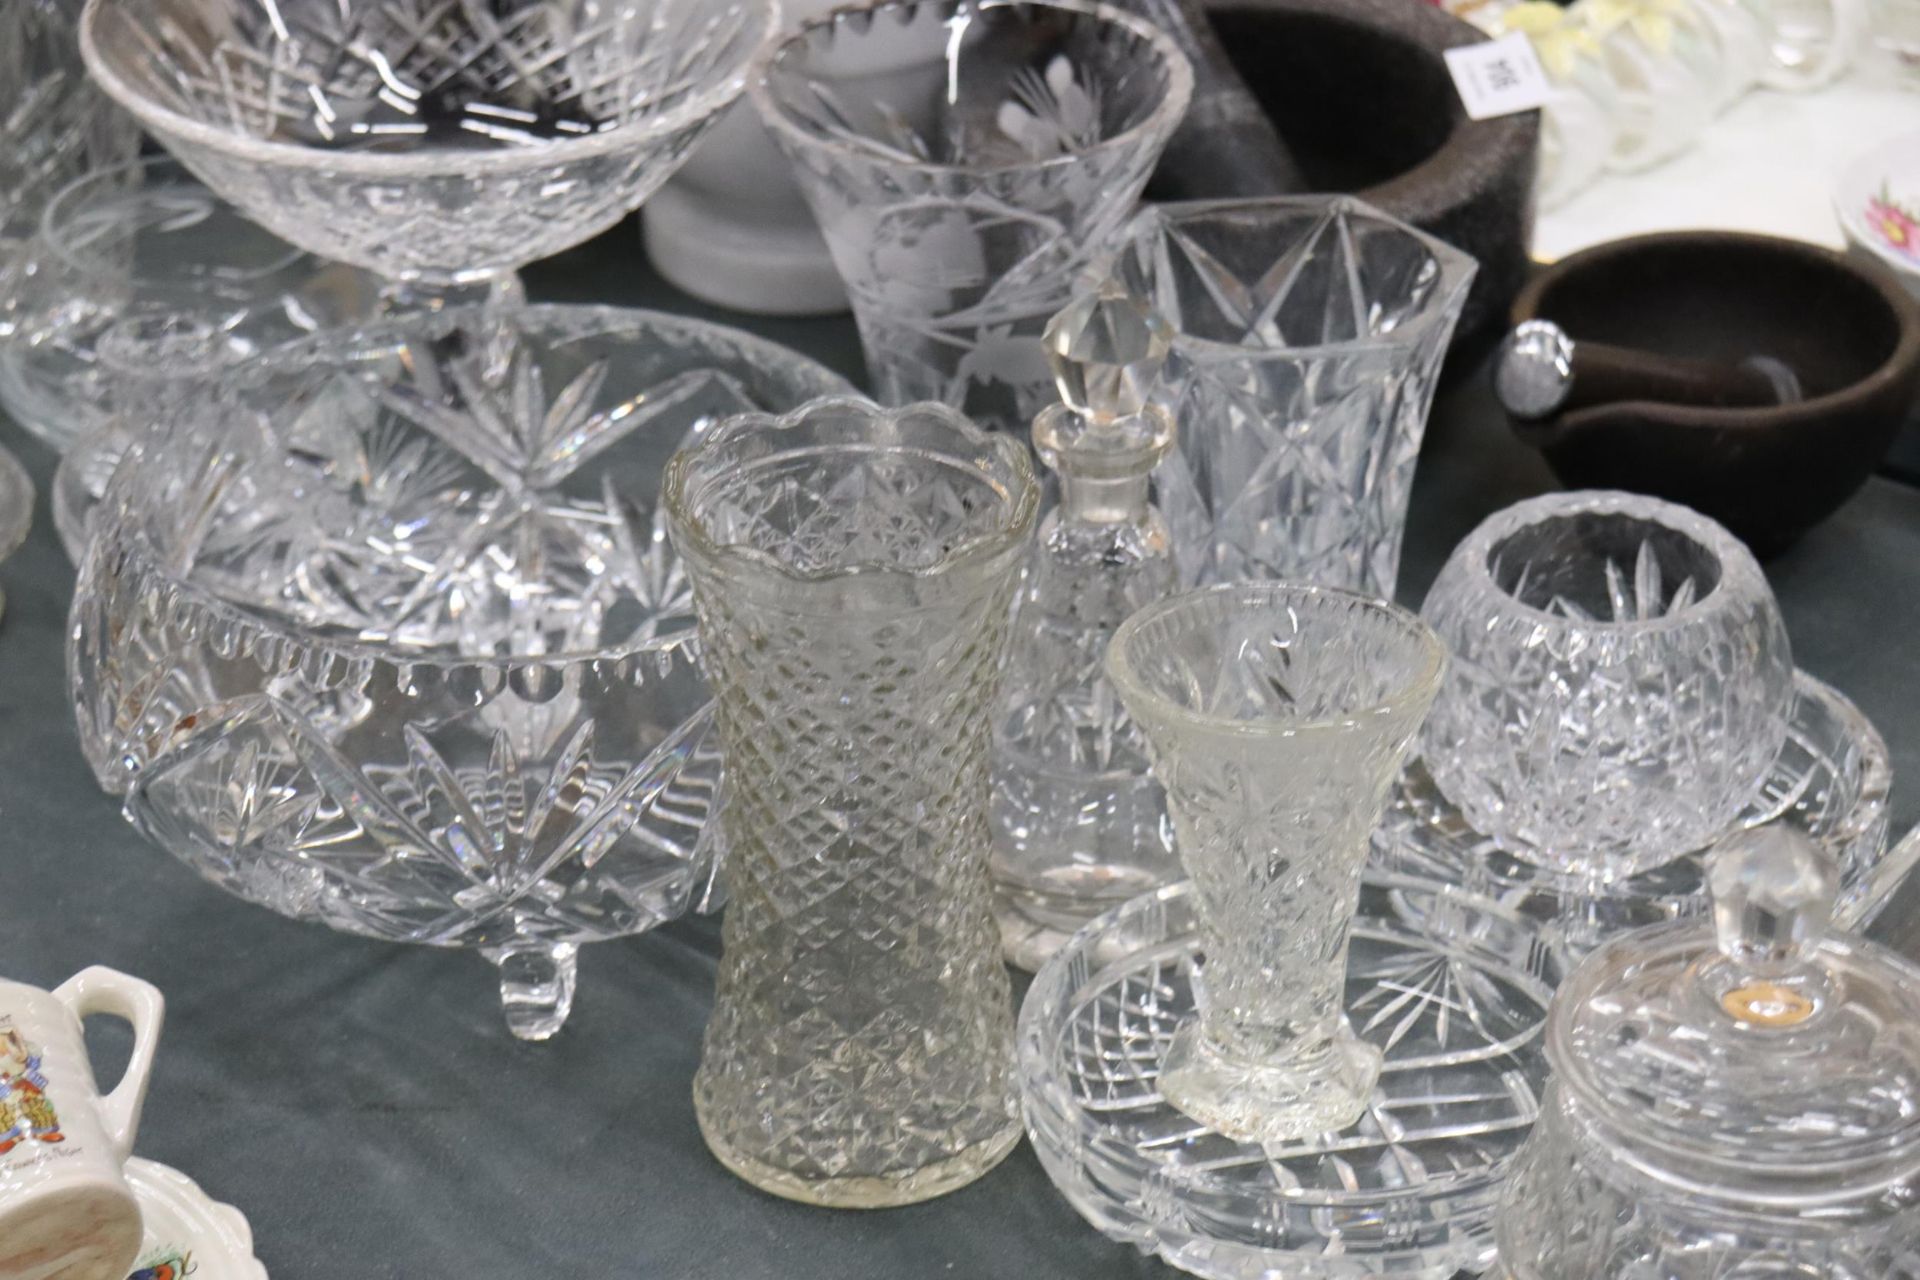 A LARGE QUANTITY OF GLASSWARE TO INCLUDE CUT GLASS VASES, BOWLS, A DRESSING TABLE SET WITH TRAY, OIL - Image 4 of 10